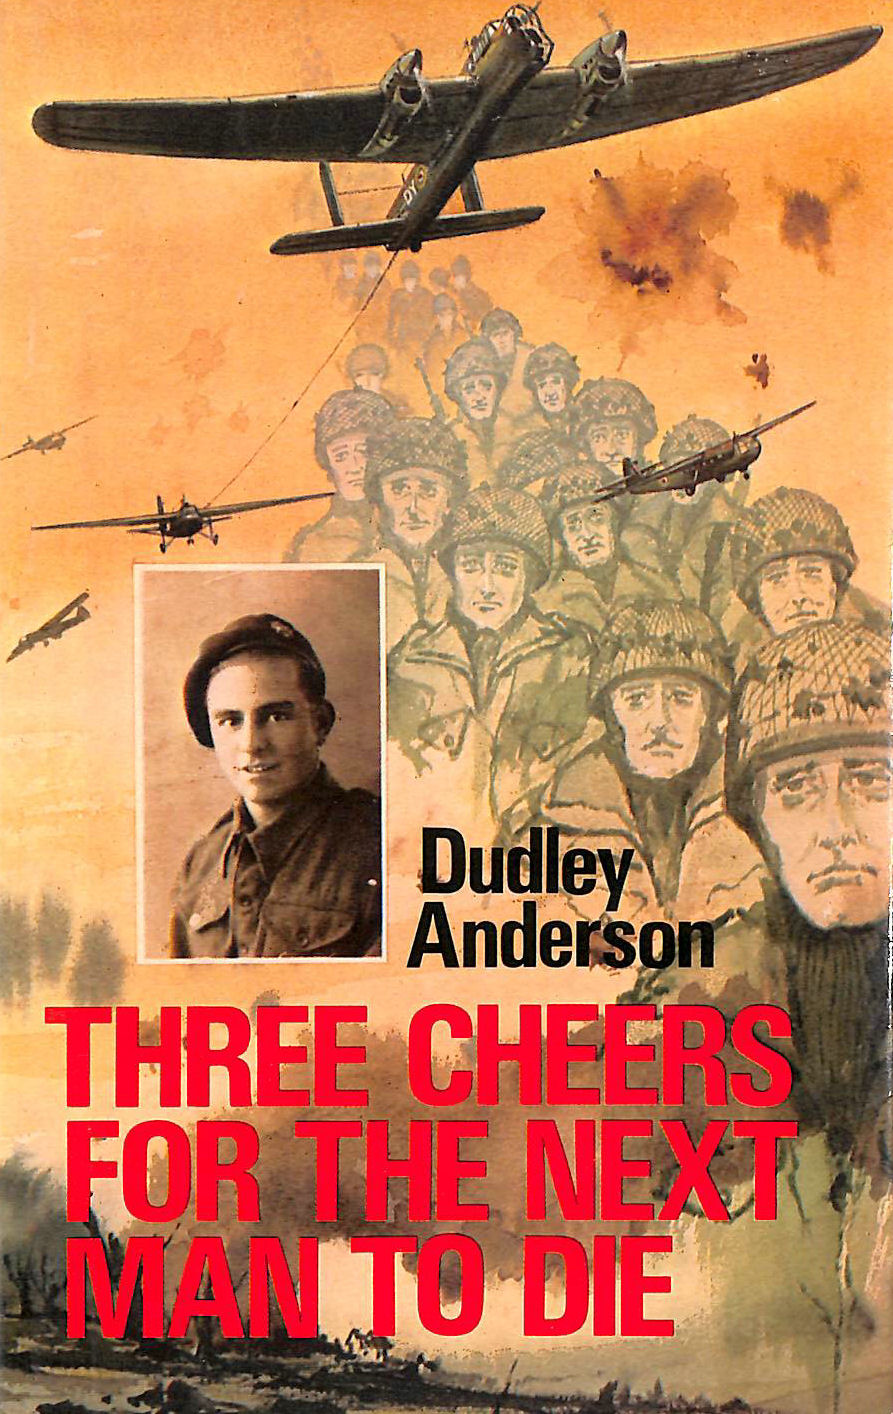 DUDLEY ANDERSON - Three Cheers for the Next Man to Die